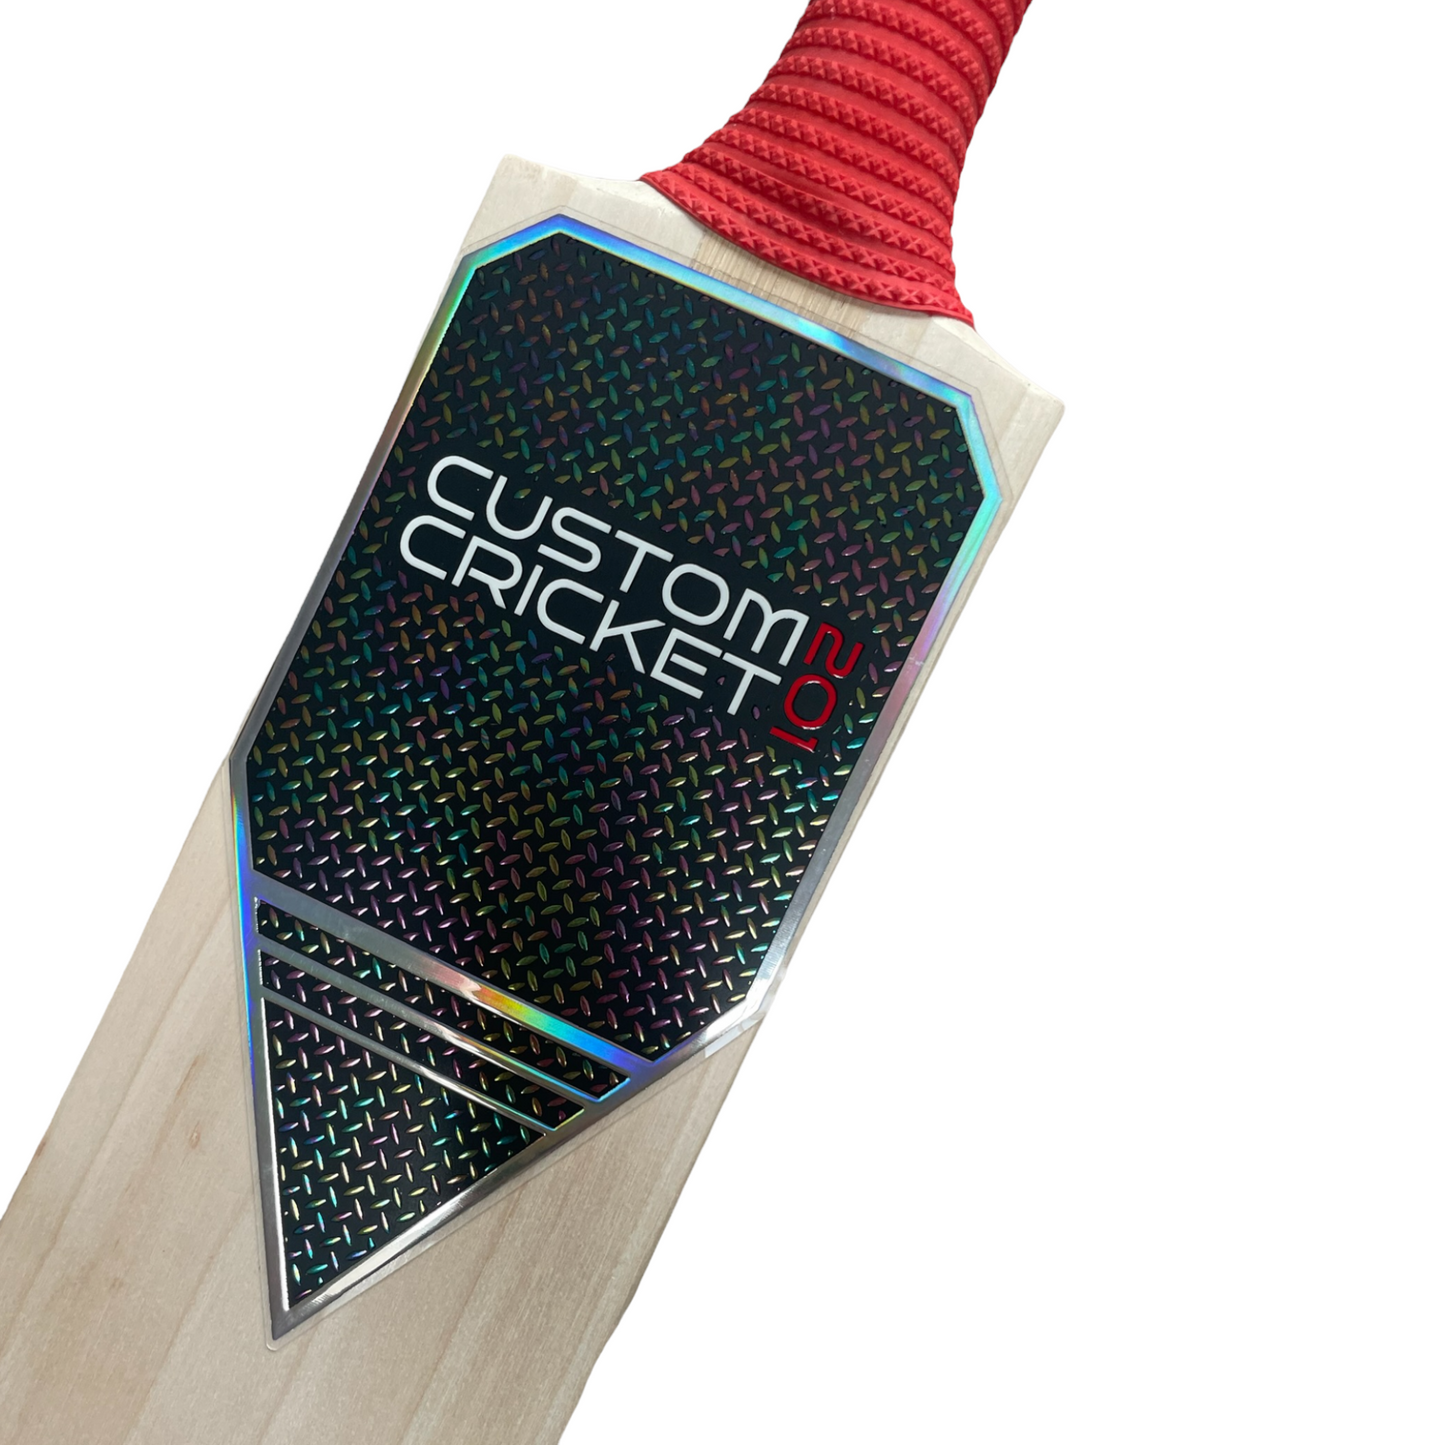 Youth childs kids cricket bat size 5 english willow handmade handcrafted christmas present online store showroom brighton and hove sussex, surrey hampshire kent london essex wales  